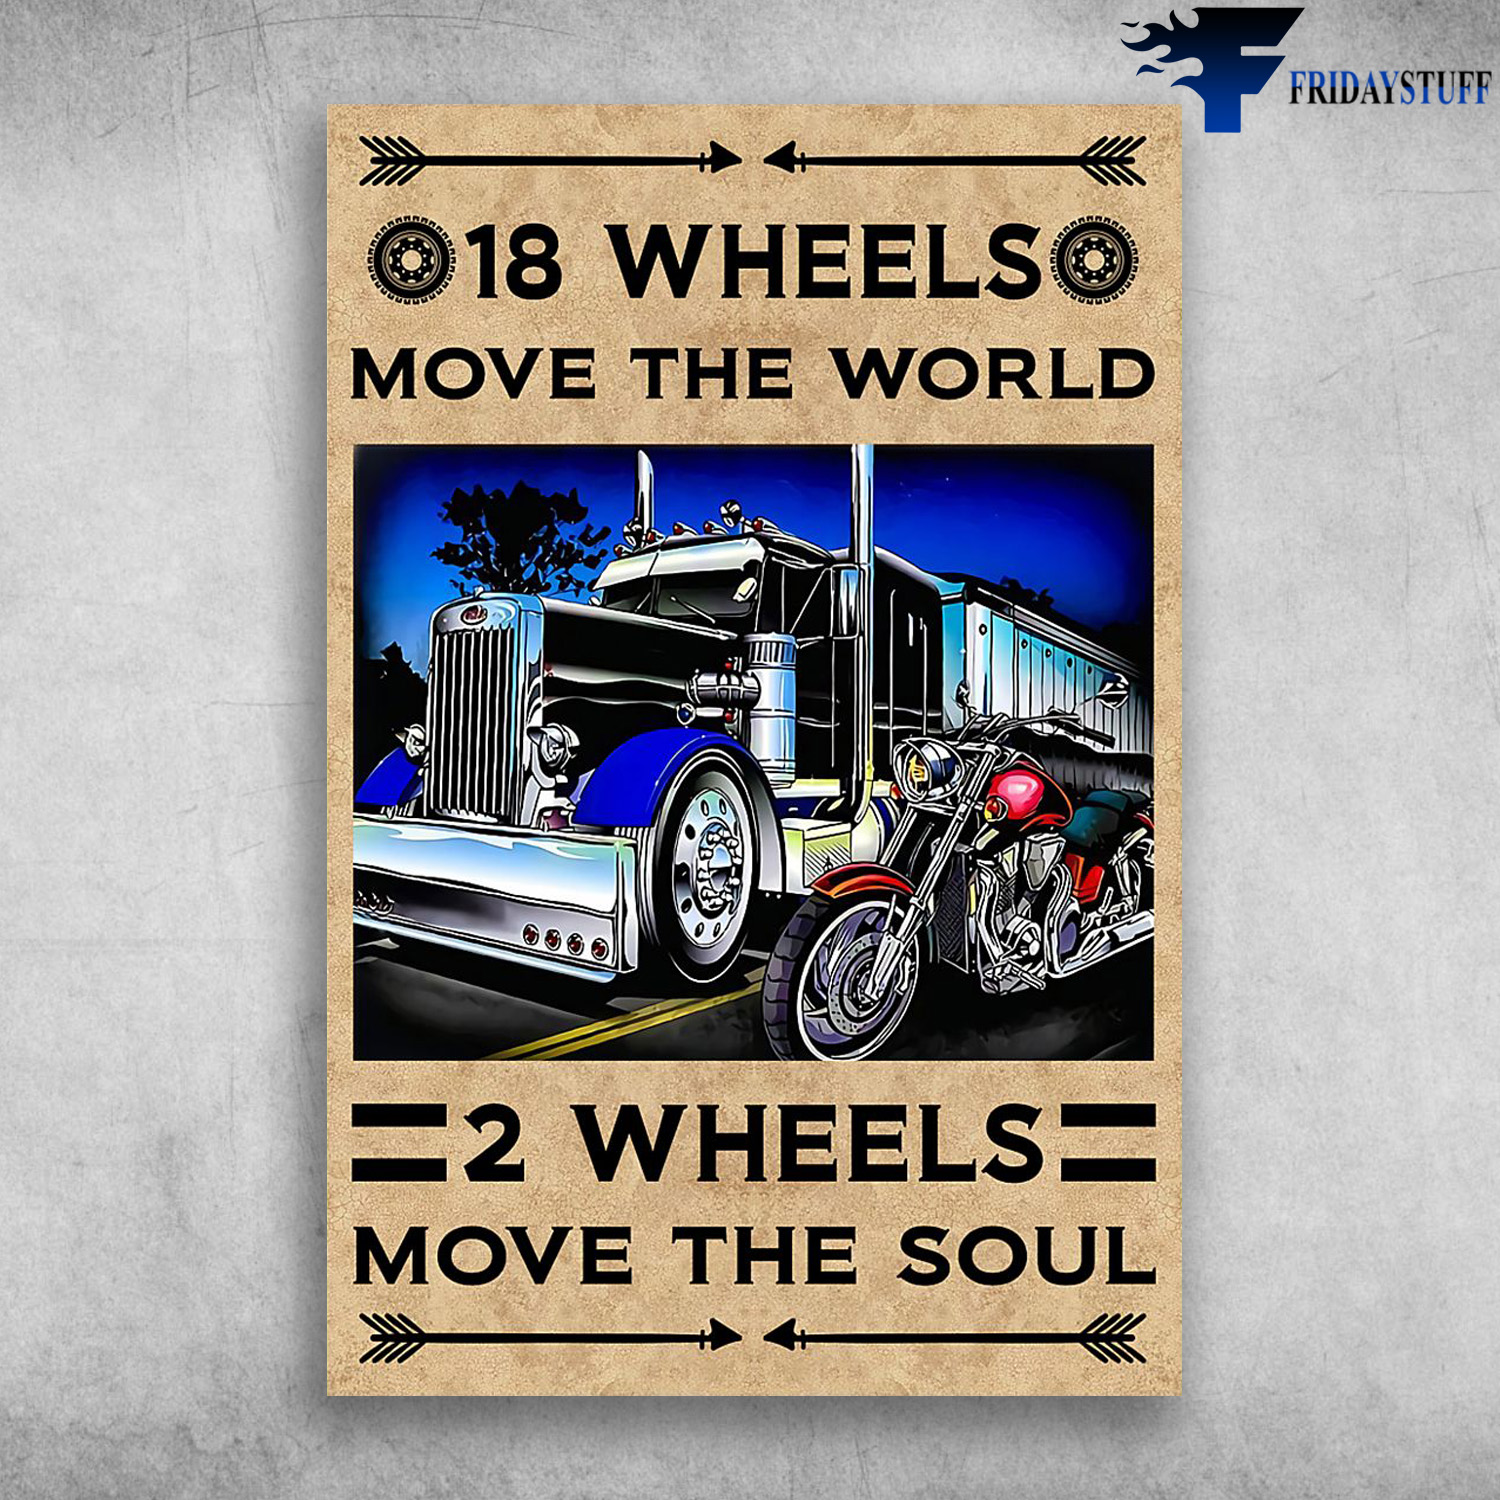 Truck And Motorbike - 18 Wheels Move The World, 2 Wheels Move The Soul